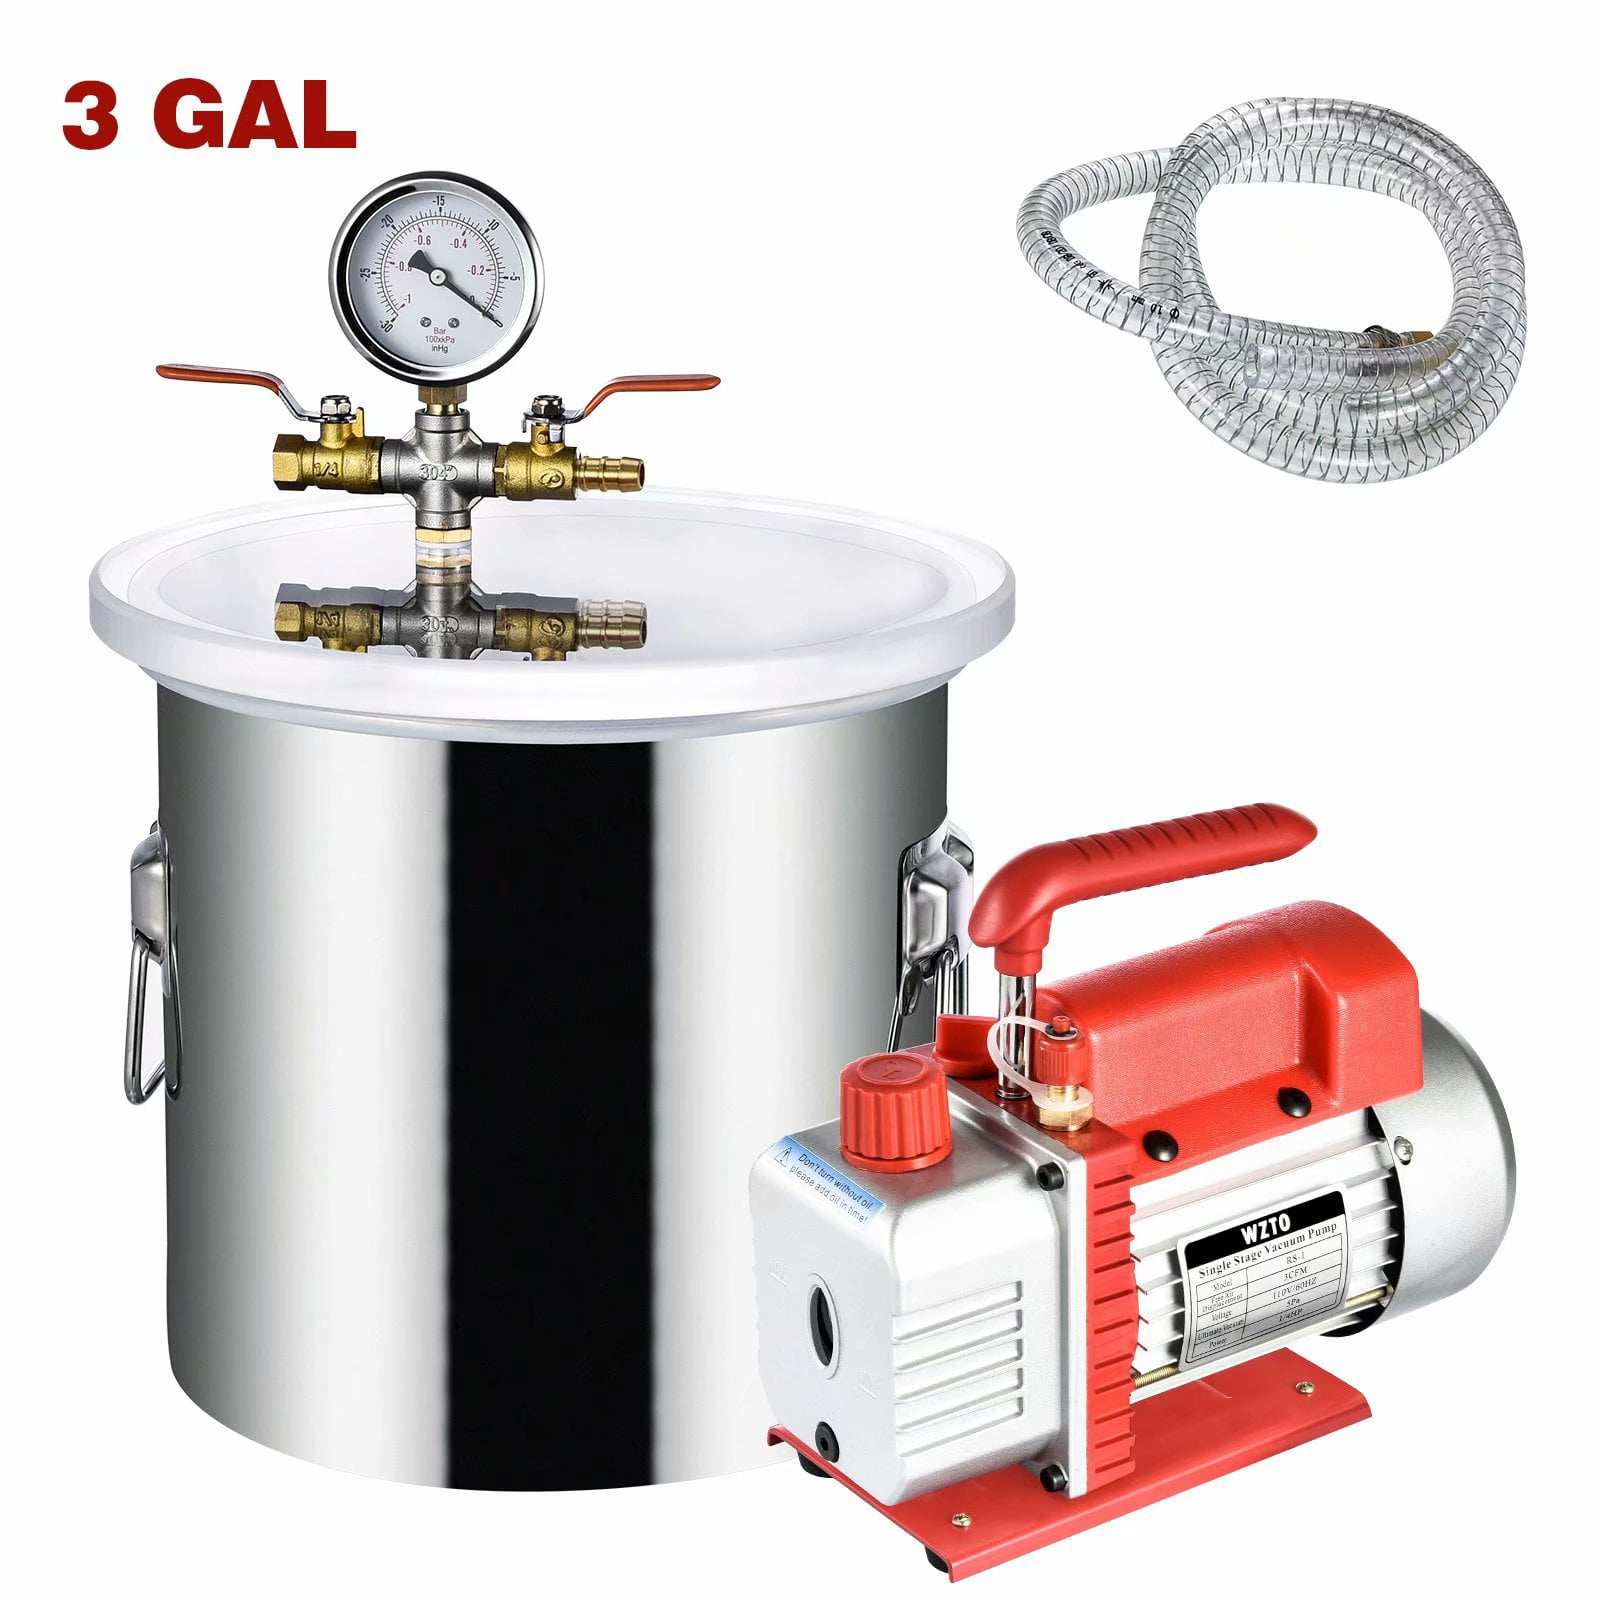 Epoxy Purge Degas Resin Silicone 2qt Stainless Steel Best Value Vacs Vacuum Degassing Chamber and Mini 3CFM Single Stage Vacuum Pump Kit